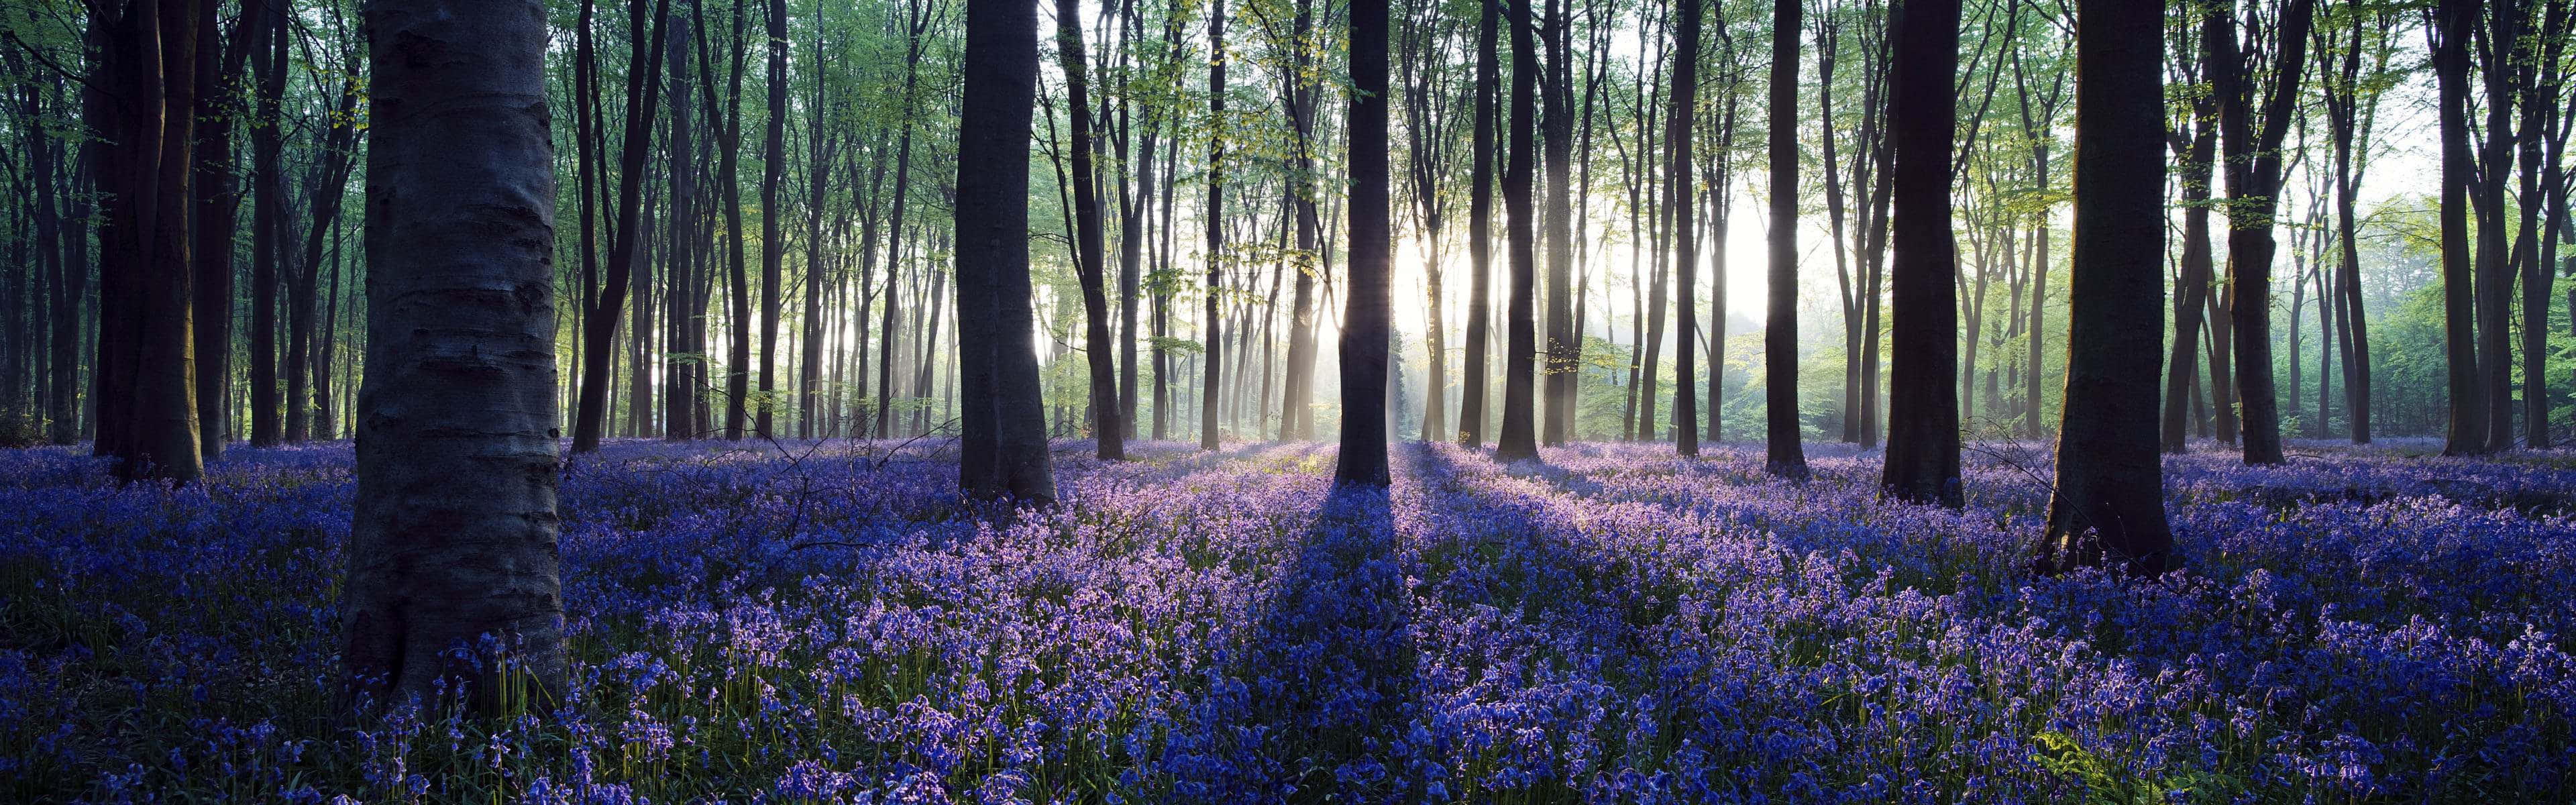 Bluebells In The Forest As A Panoramic Desktop Wallpaper